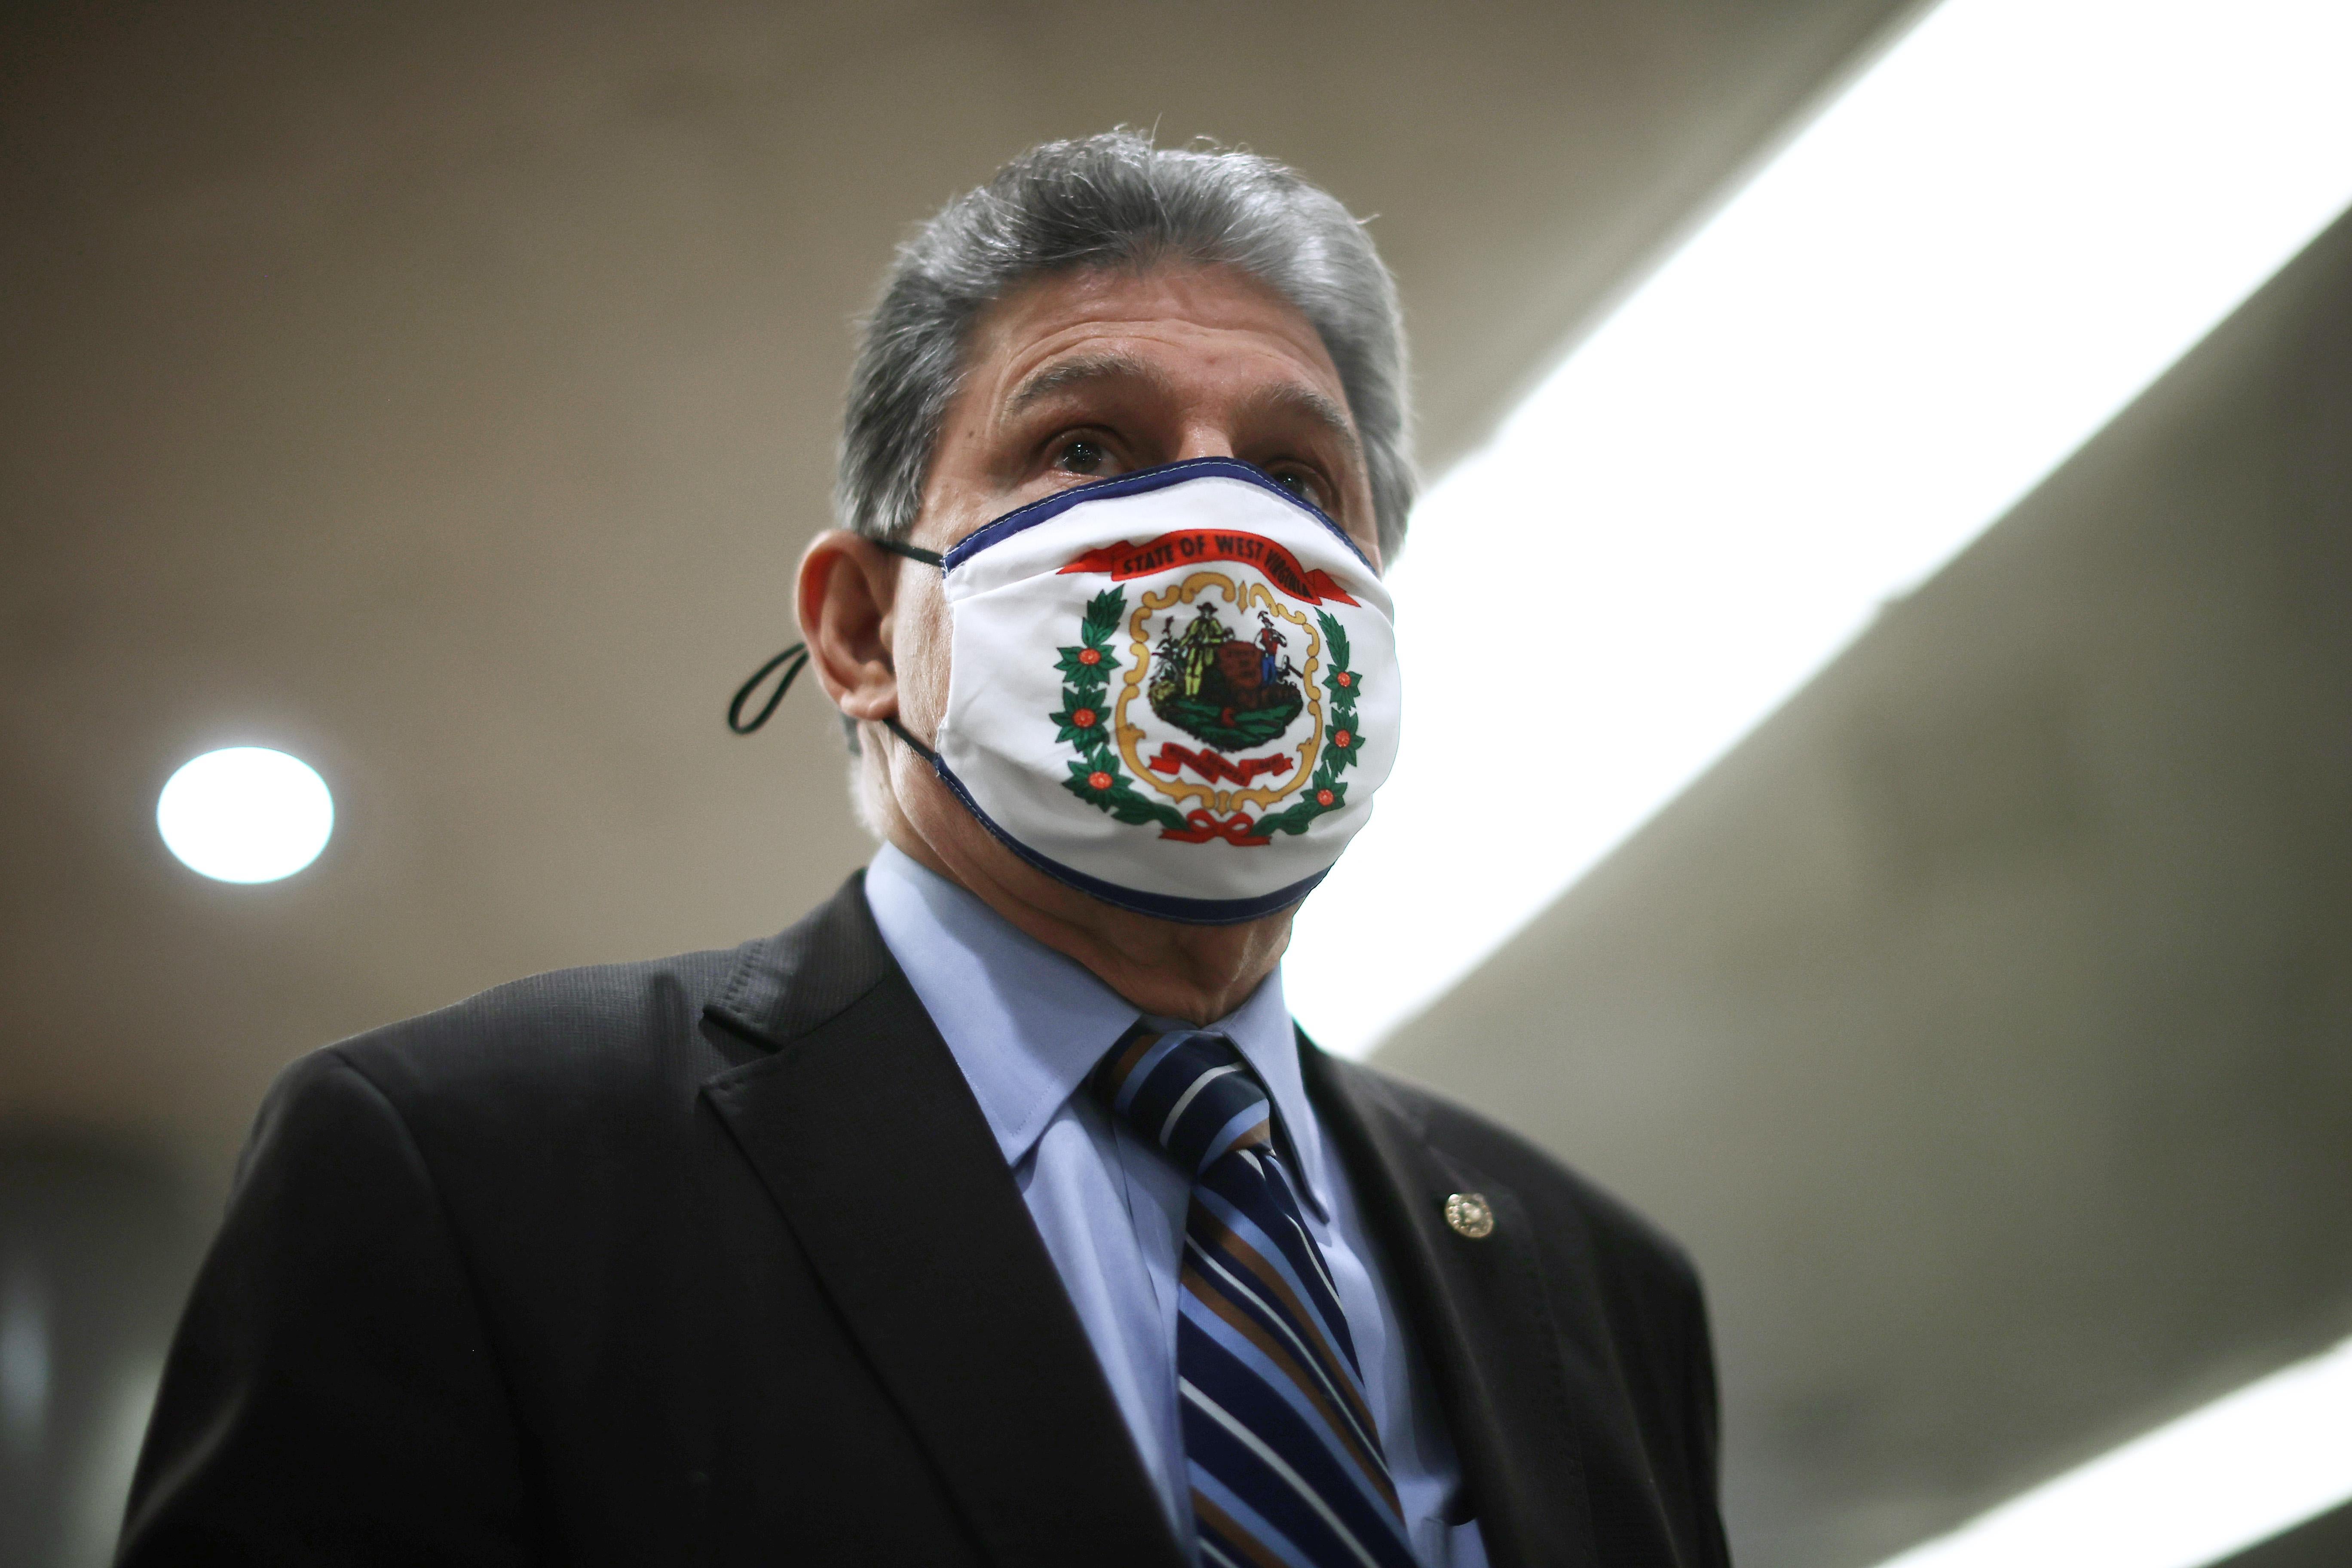 Manchin wearing a mask that has the West Virginia coat of arms on it